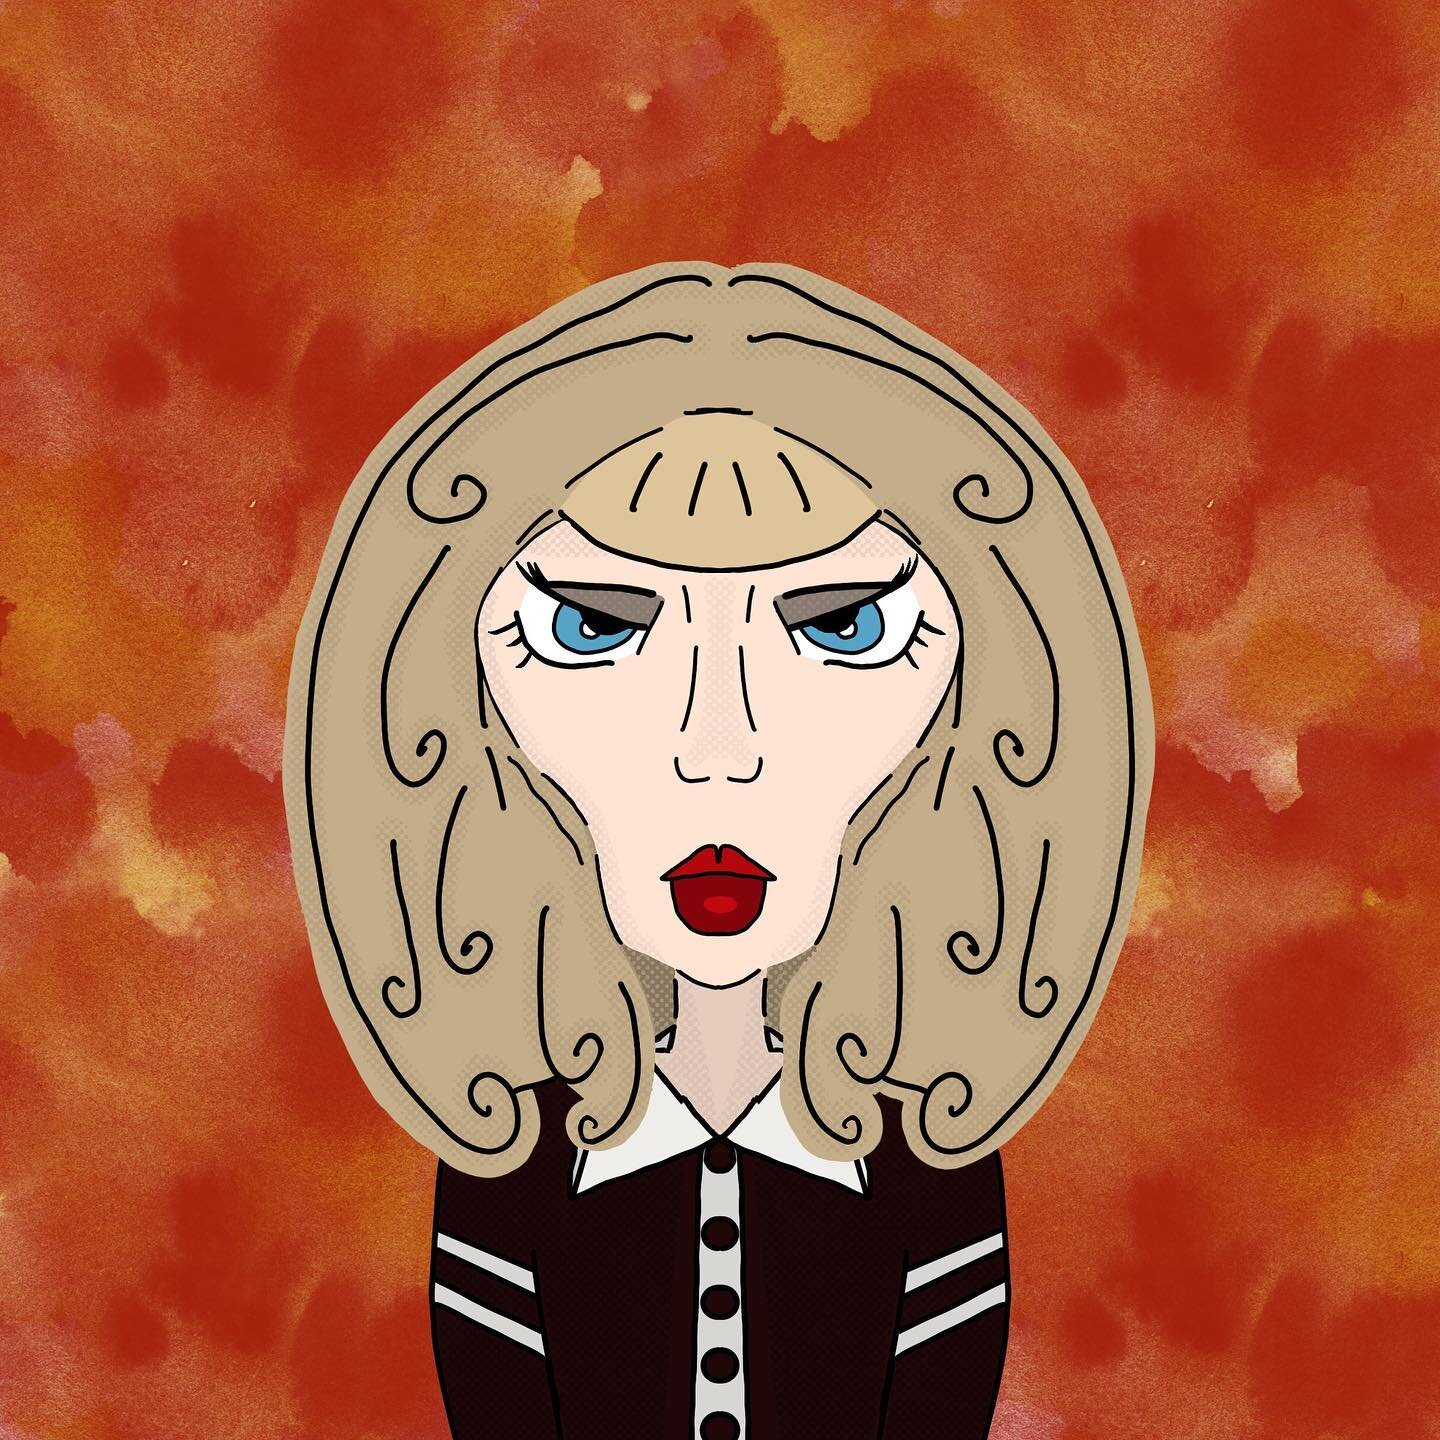 Mod Queen #5
(Traci Lords inspired)